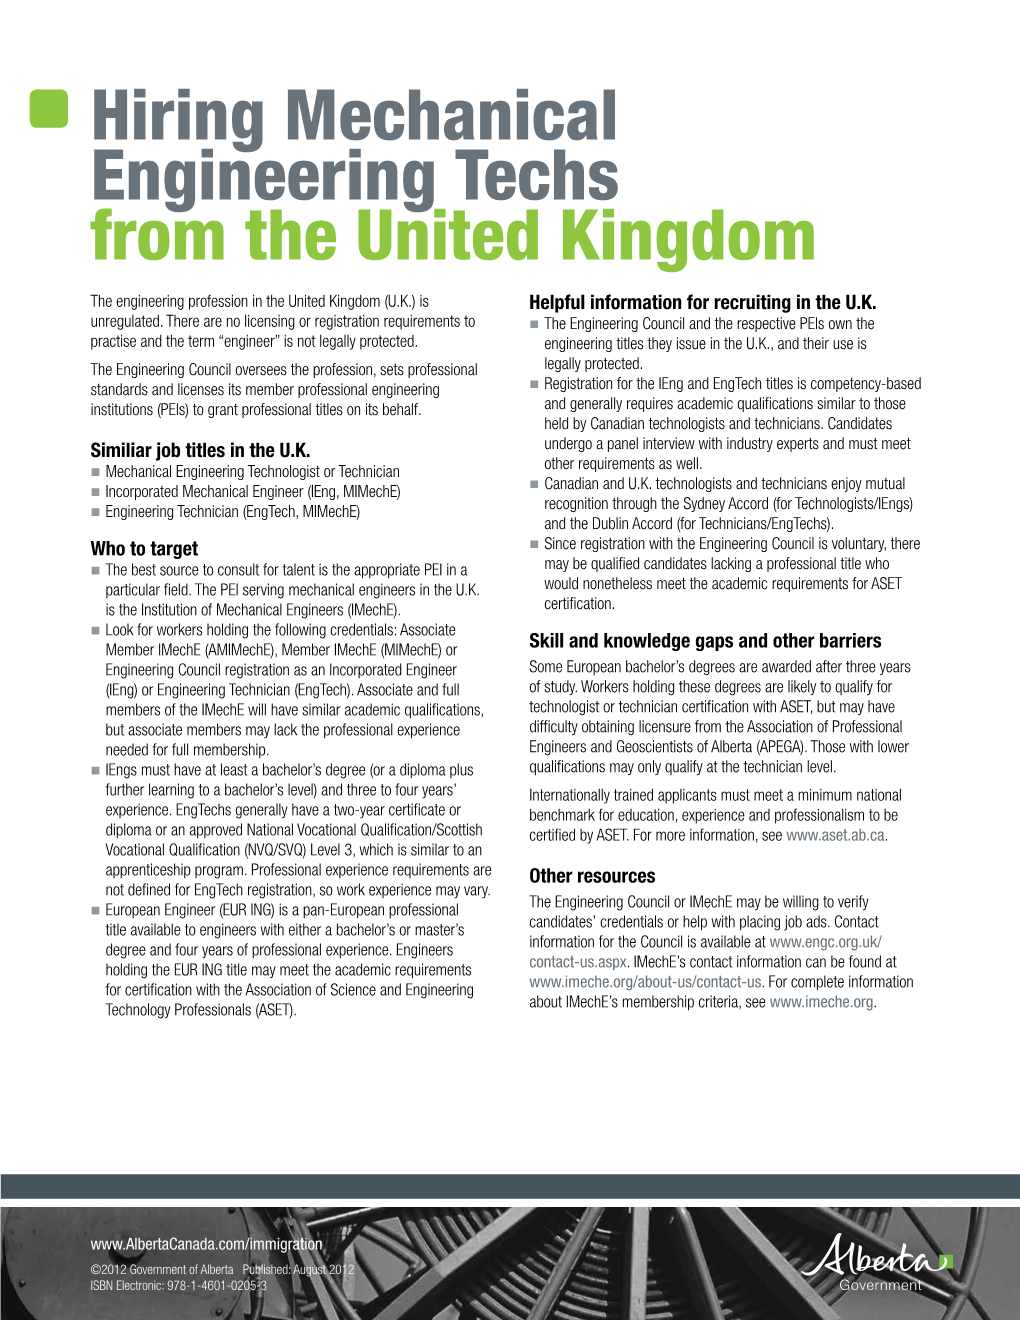 Hiring Mechanical Engineering Techs from the United Kingdom the Engineering Profession in the United Kingdom (U.K.) Is Helpful Information for Recruiting in the U.K